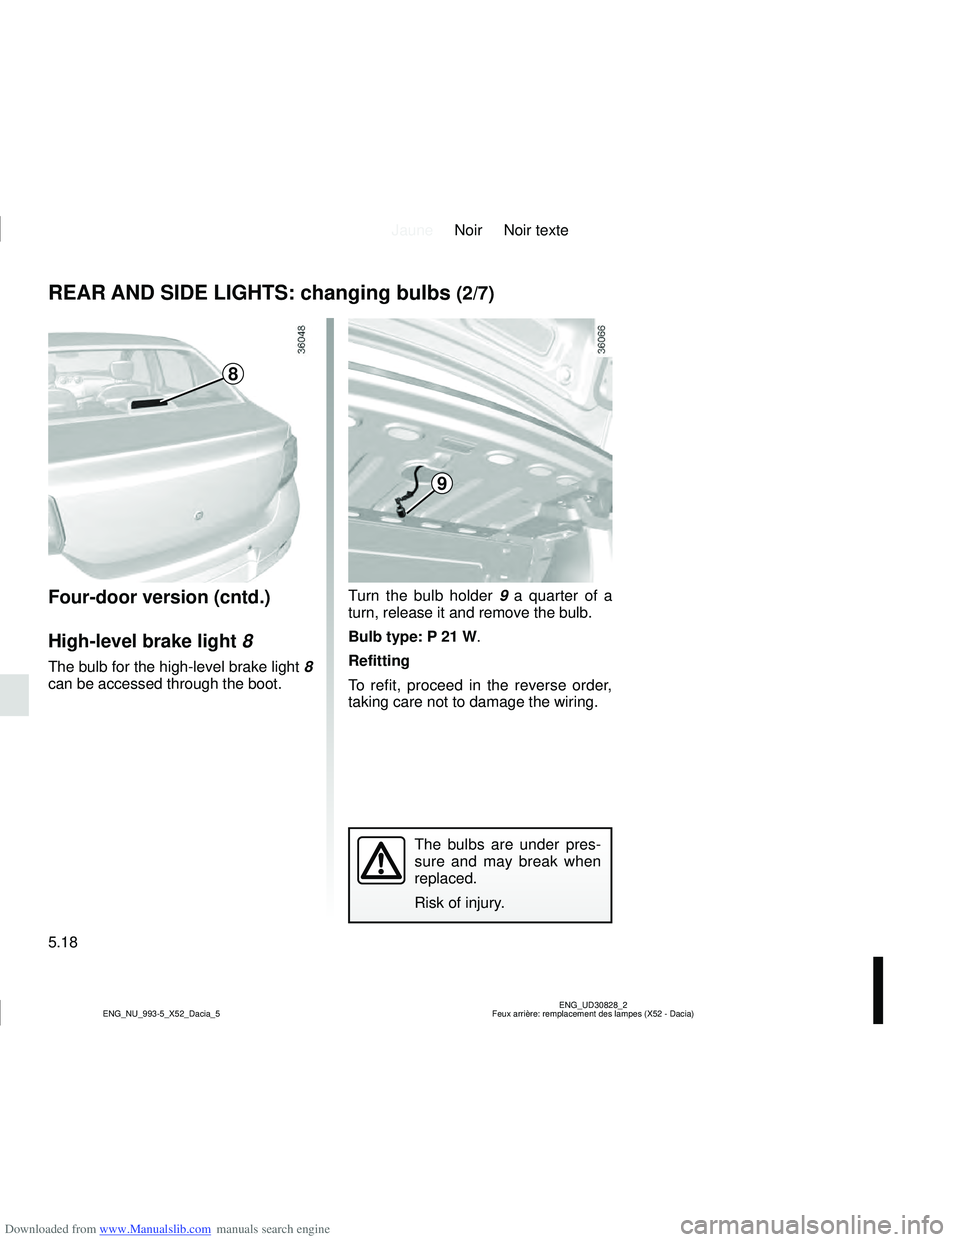 DACIA SANDERO 2010  Owners Manual Downloaded from www.Manualslib.com manuals search engine JauneNoir Noir texte
5.18
ENG_UD30828_2
Feux arrière: remplacement des lampes (X52 - Dacia)
ENG_NU_993-5_X52_Dacia_5
REAR AND SIDE LIGHTS: cha